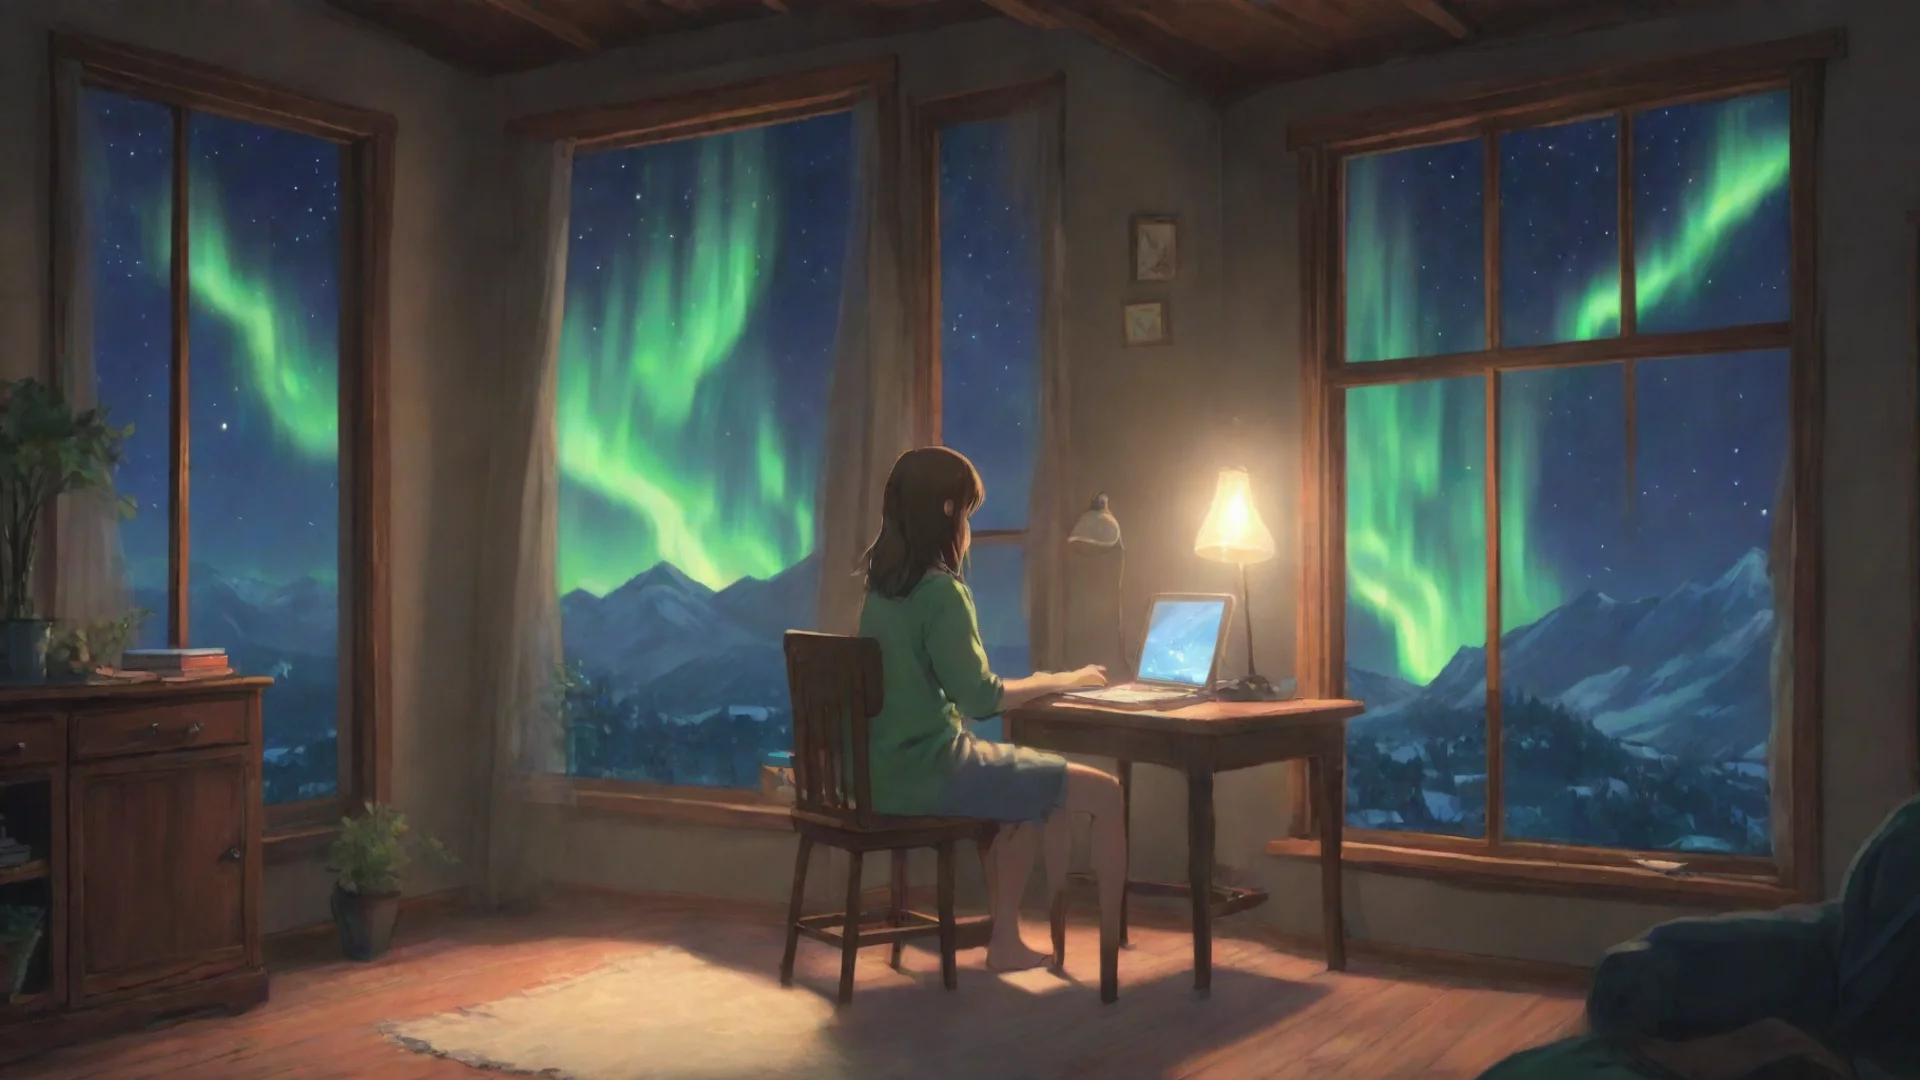 artstation art can you draw of a girl sitting on a chair and using a computer inside of his house and the window is like northern lights in studio ghibli art style confident engaging wow